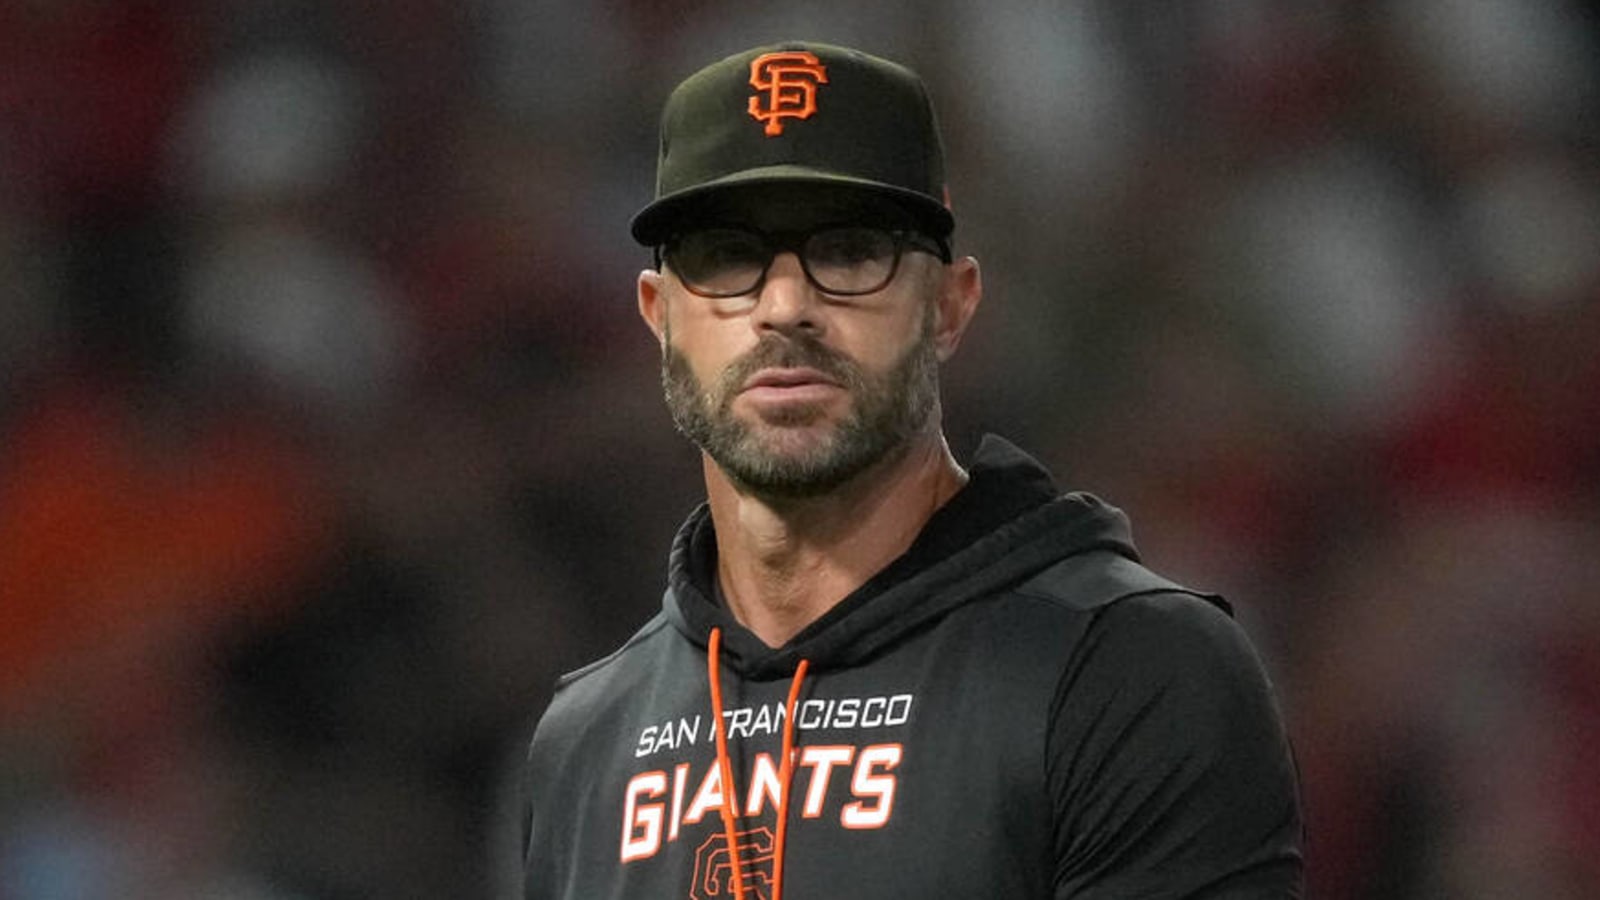 After Gabe Kapler's firing, Giants fall to Dodgers in a losing season